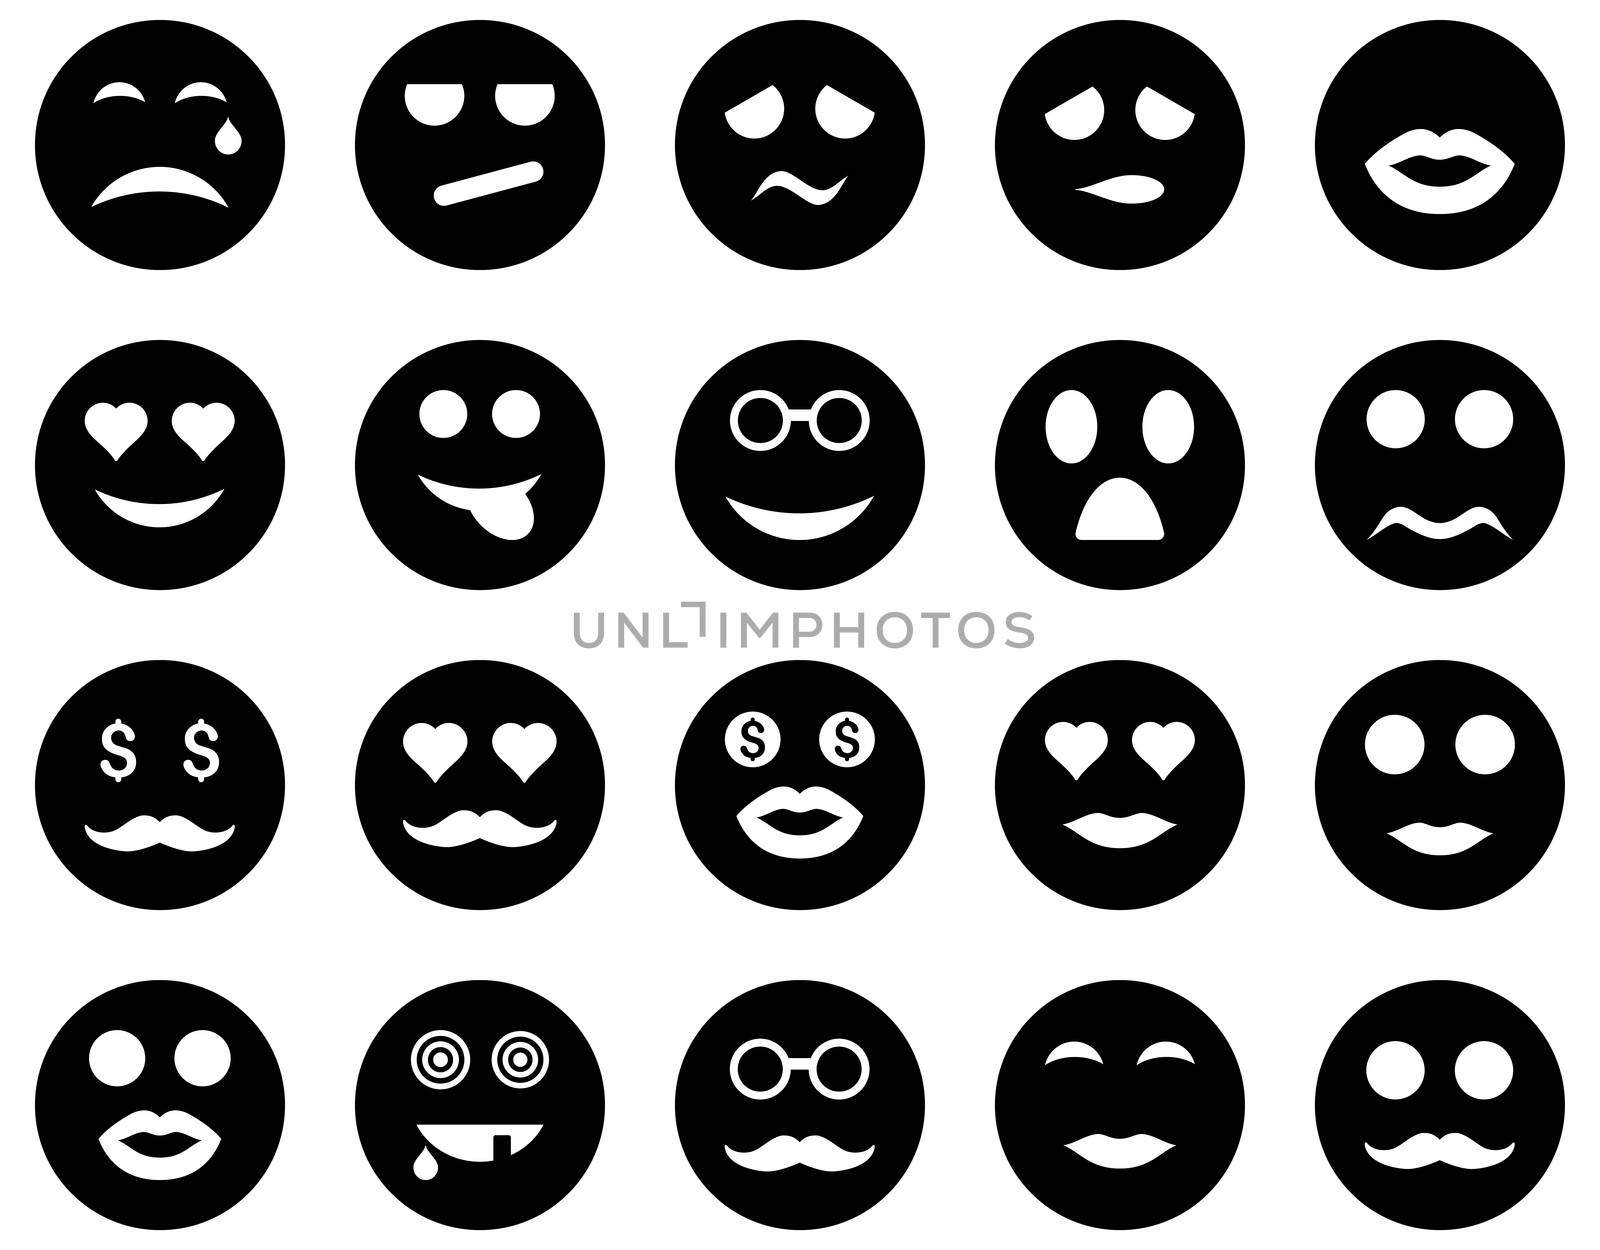 Smile and emotion icons. Glyph set style is flat images, black symbols, isolated on a white background.